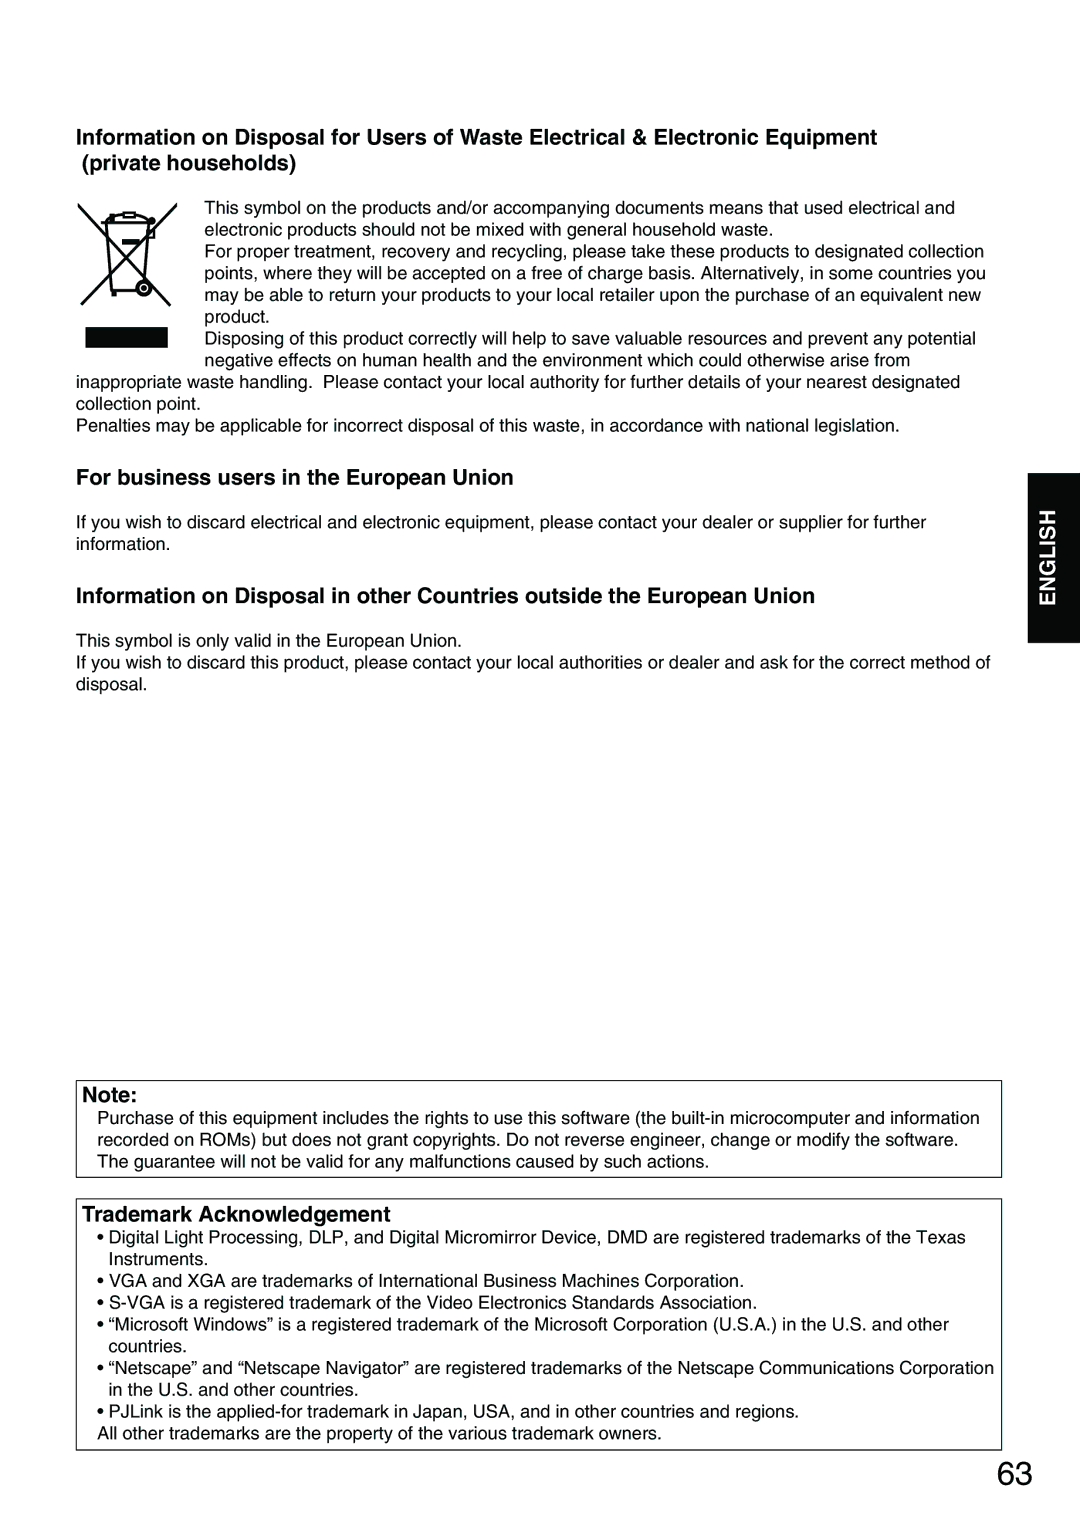 Panasonic PT-D3500E manual For business users in the European Union, Trademark Acknowledgement 